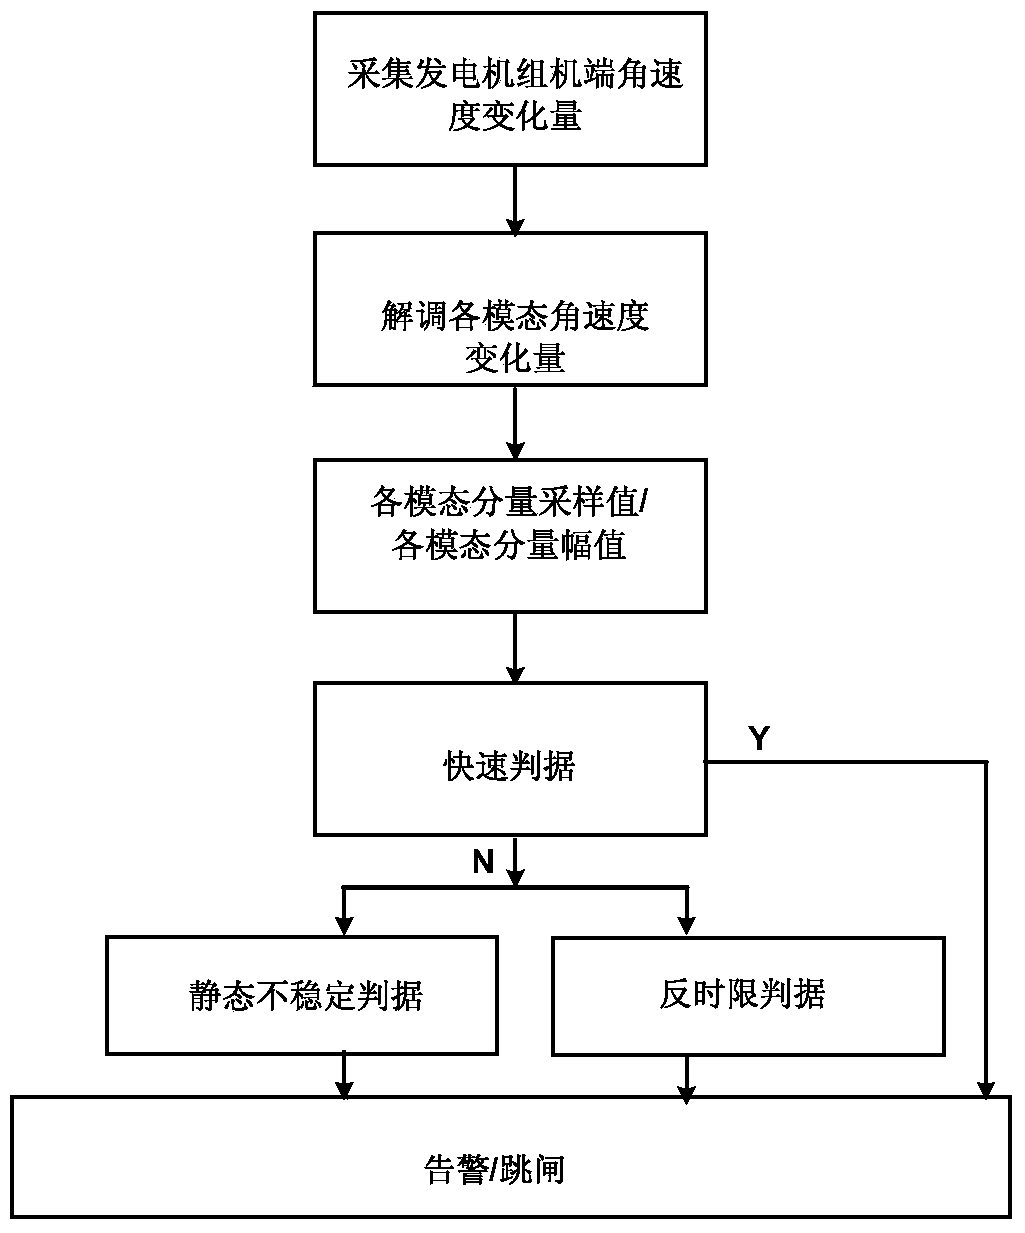 Torsional Vibration Protection Method and Device for Turbine Generator Shaft System